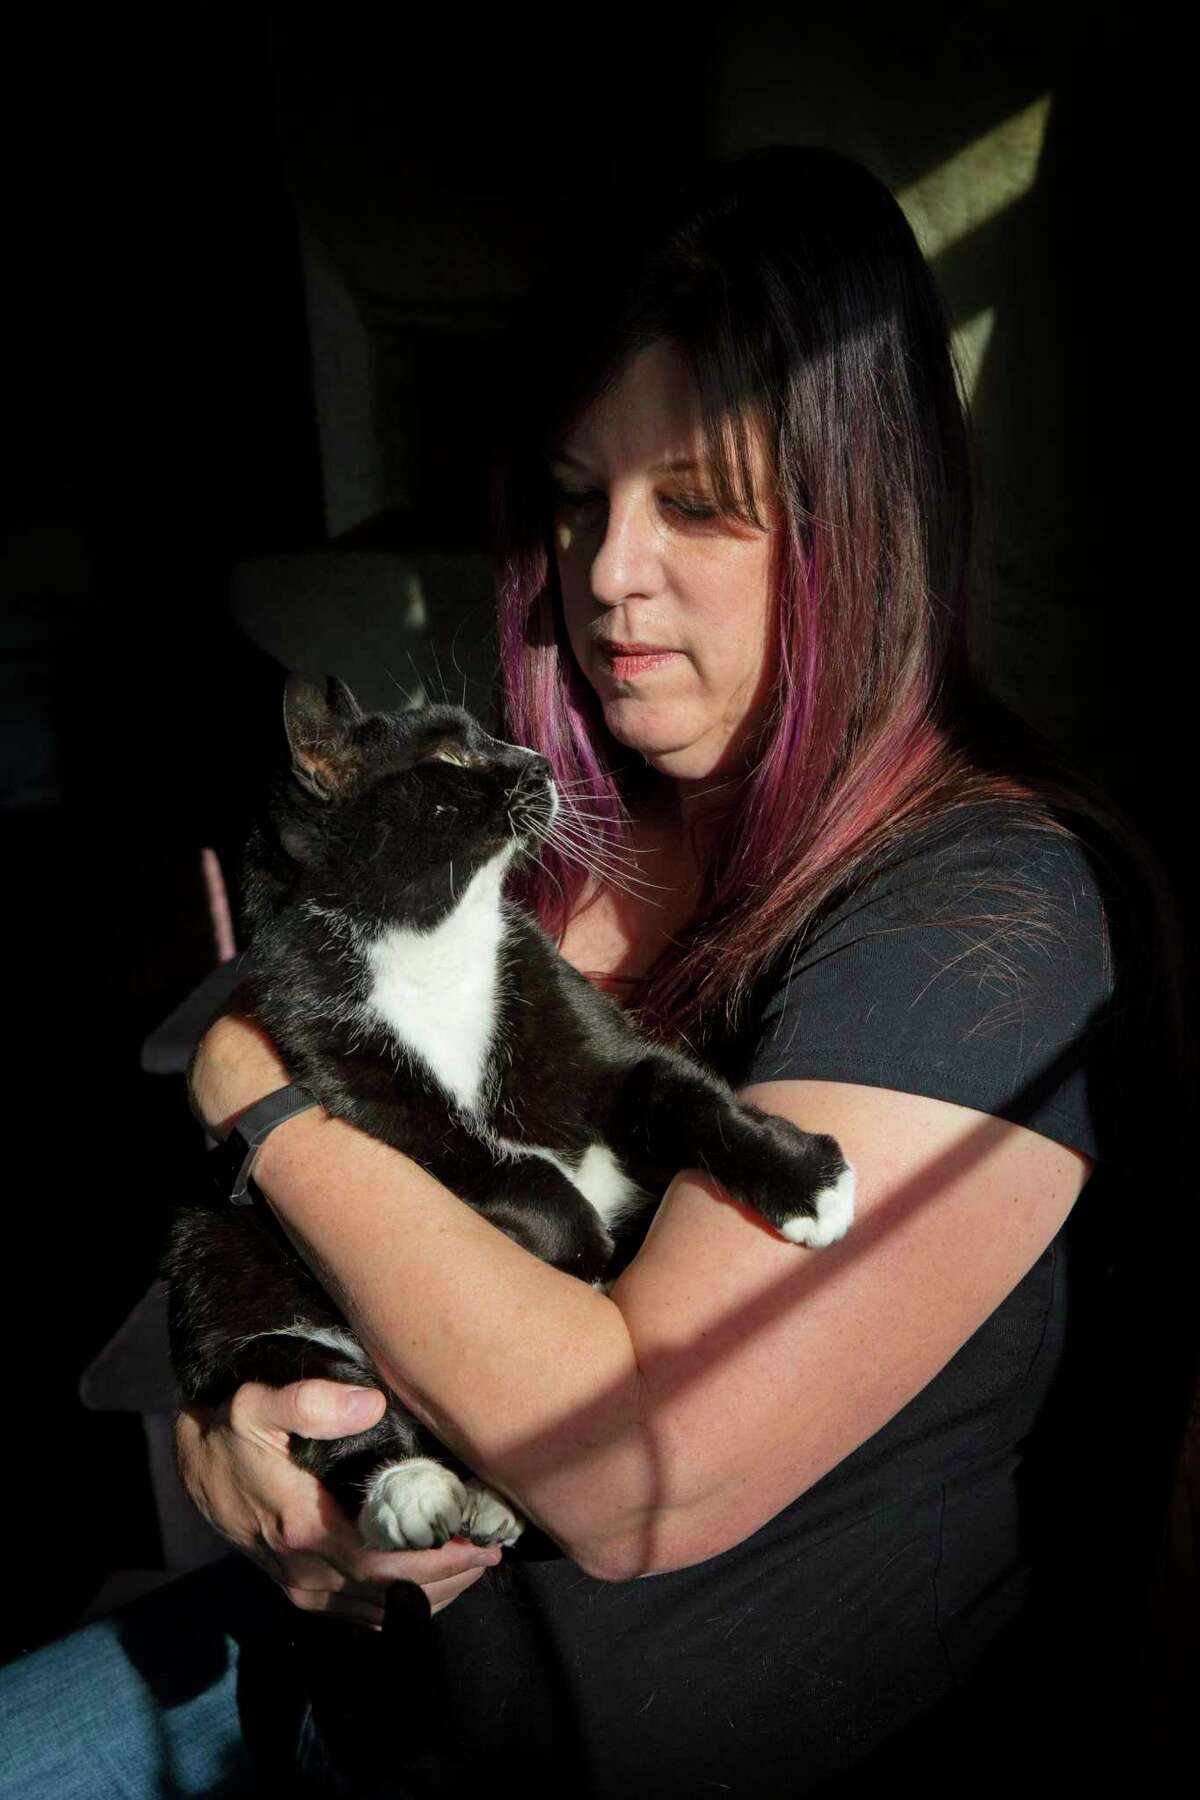 Shelly Ross, who runs cat-sitting services Tales of the Kitty, was among thousands of Californians whose unemployment benefits were frozen by the state this year.